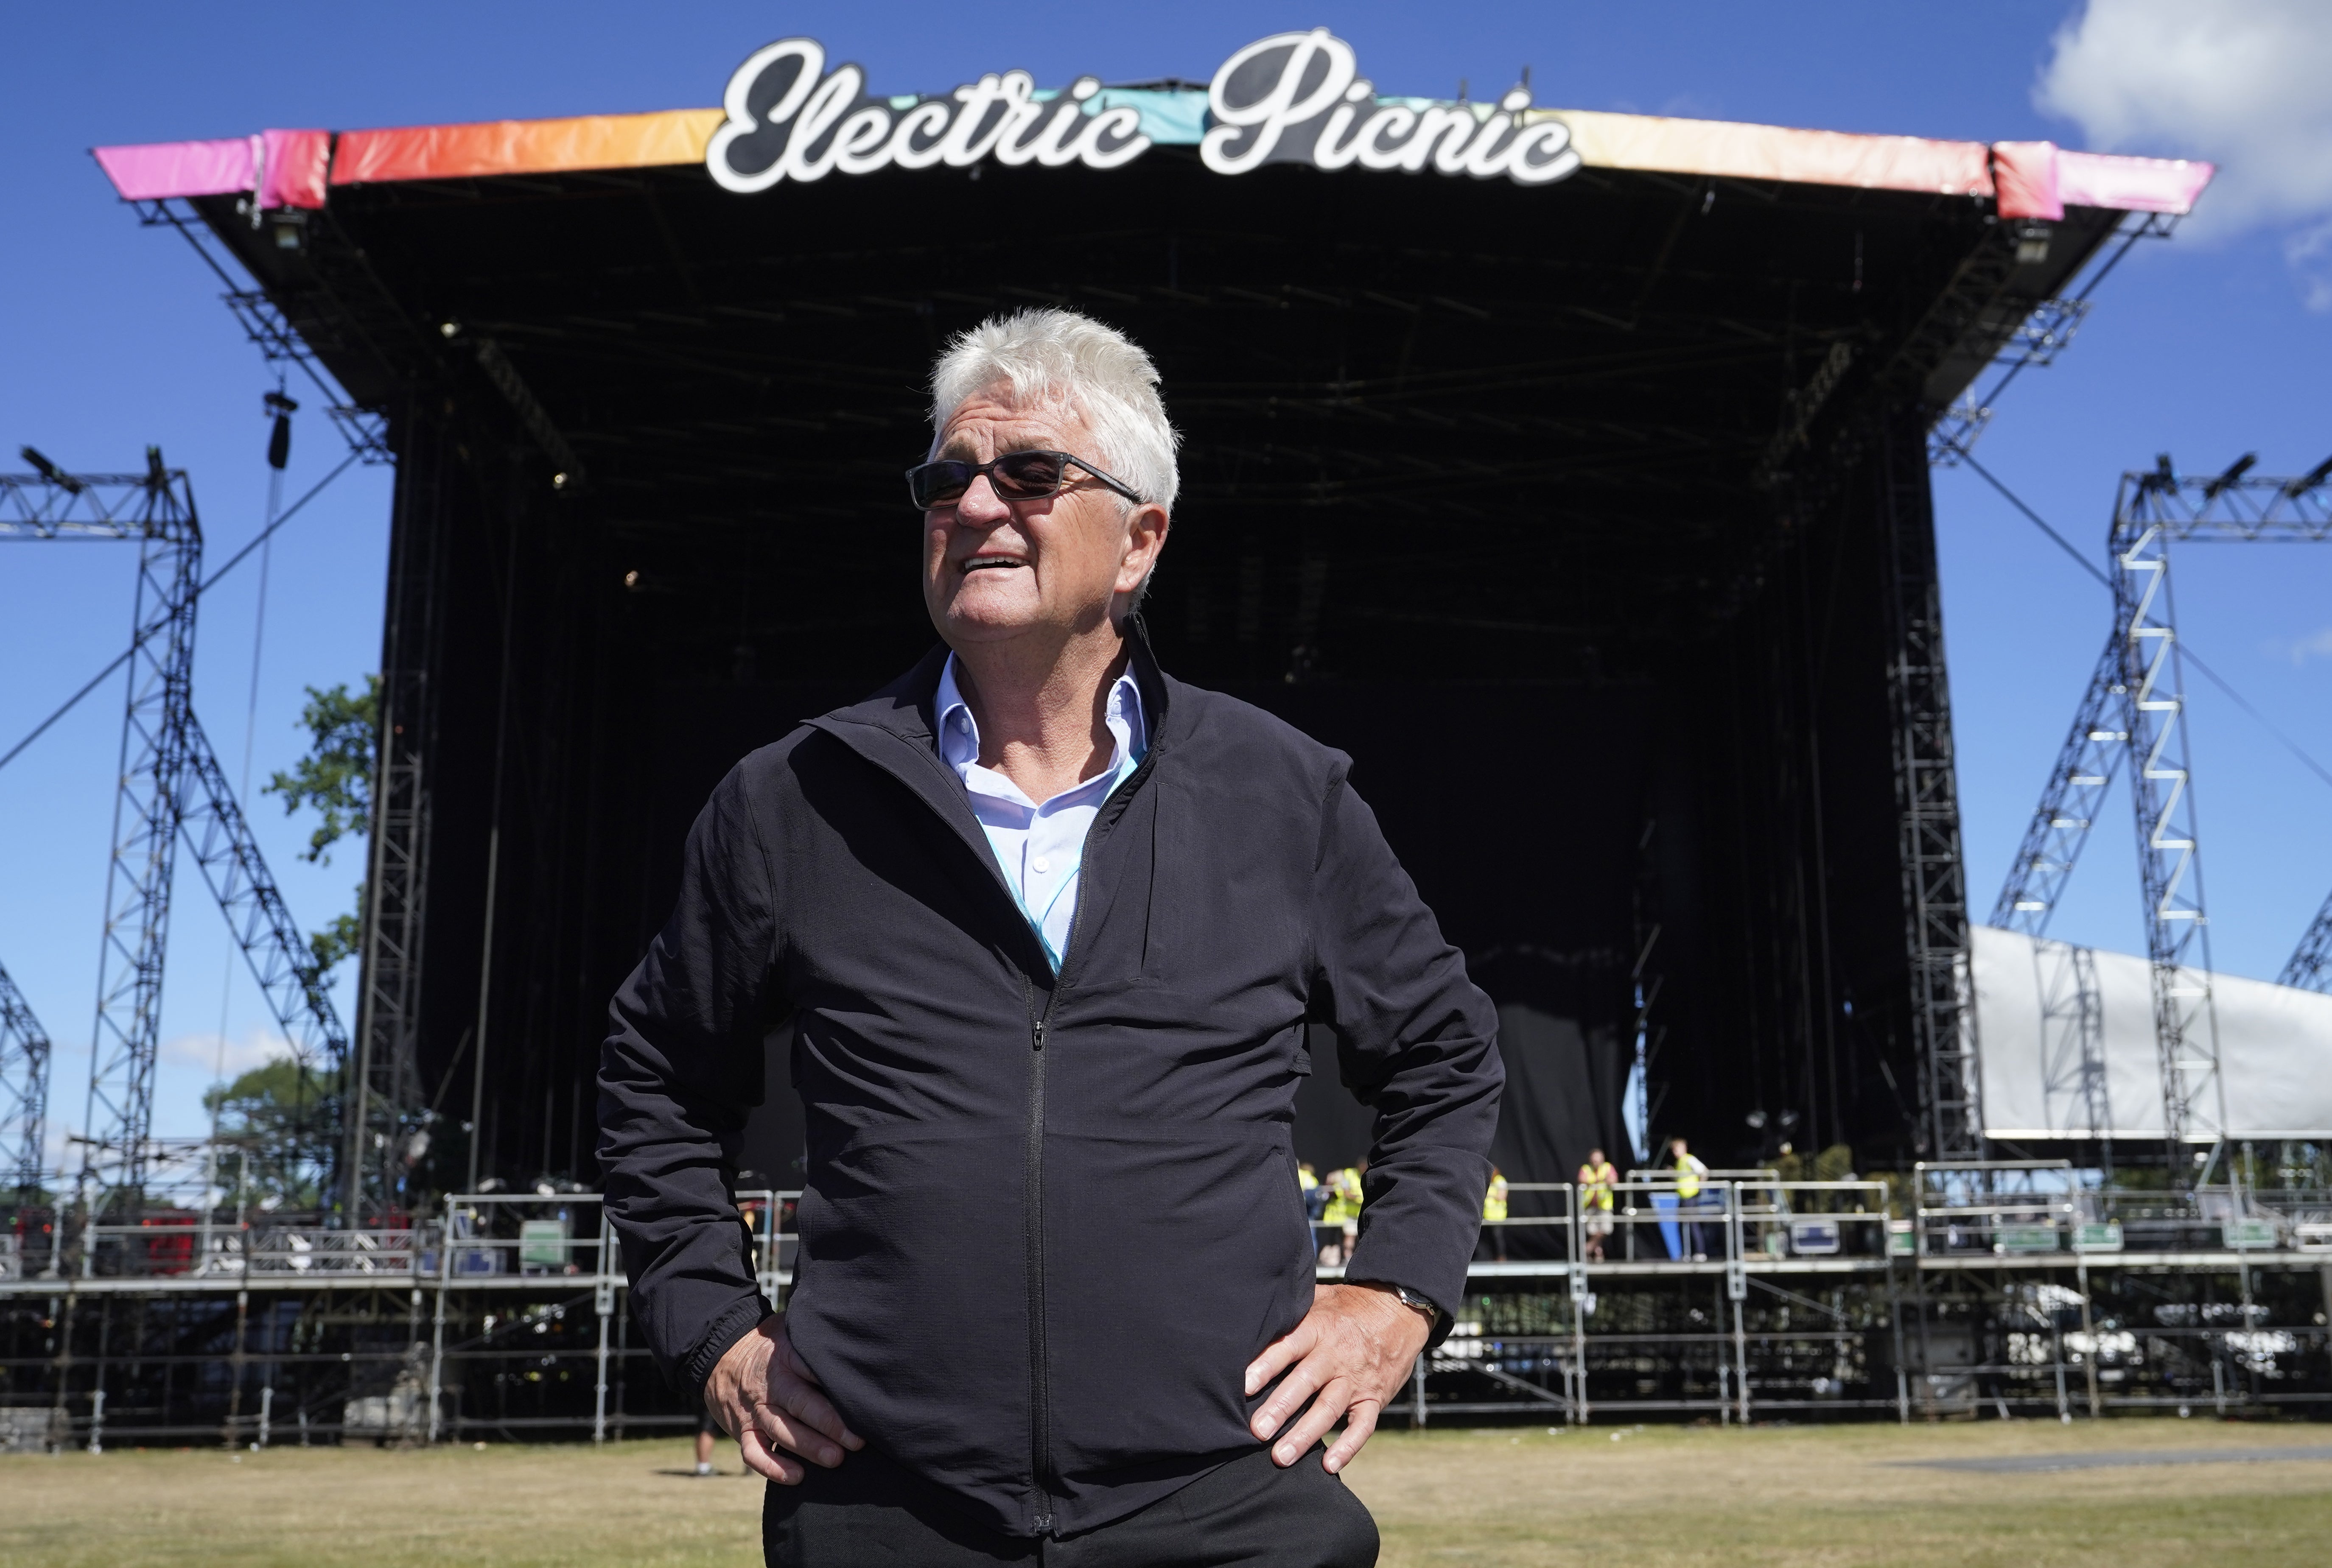 Electric Picnic festival director Melvin Benn in front of the main stage during a press preview of the Electric Picnic festival in Stradbally, County Laois (Niall Carson/PA)